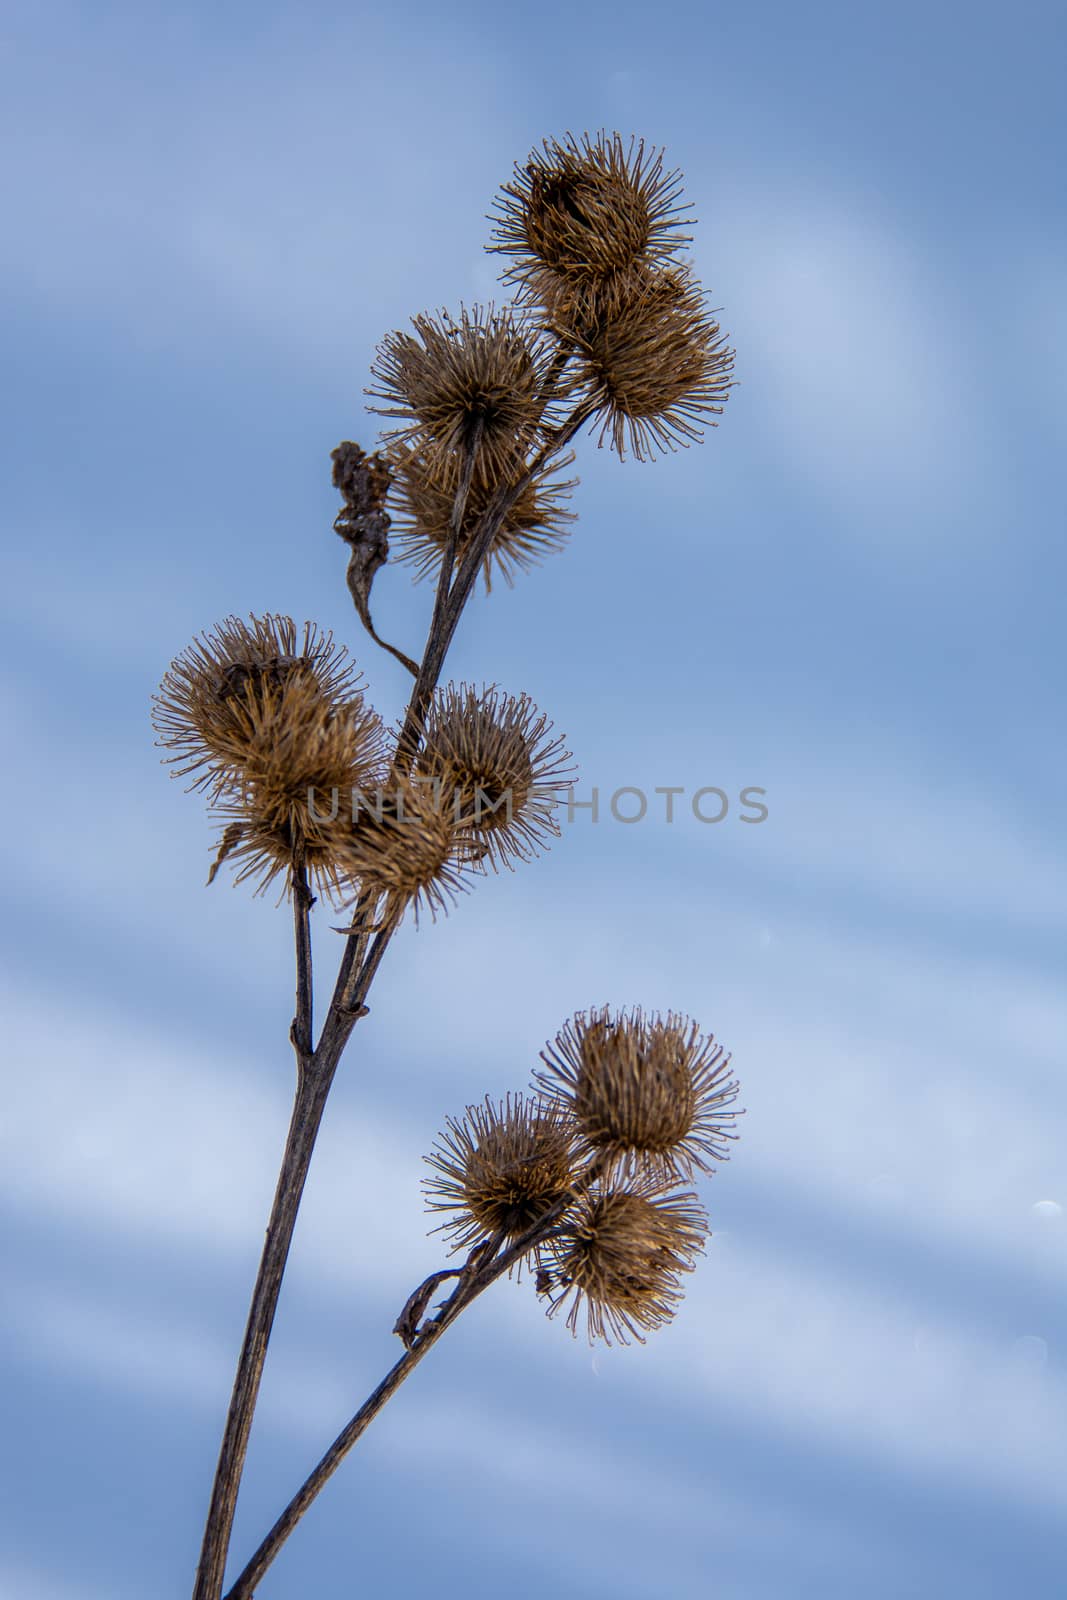 Withered thorns of agrimony in the snow by ben44